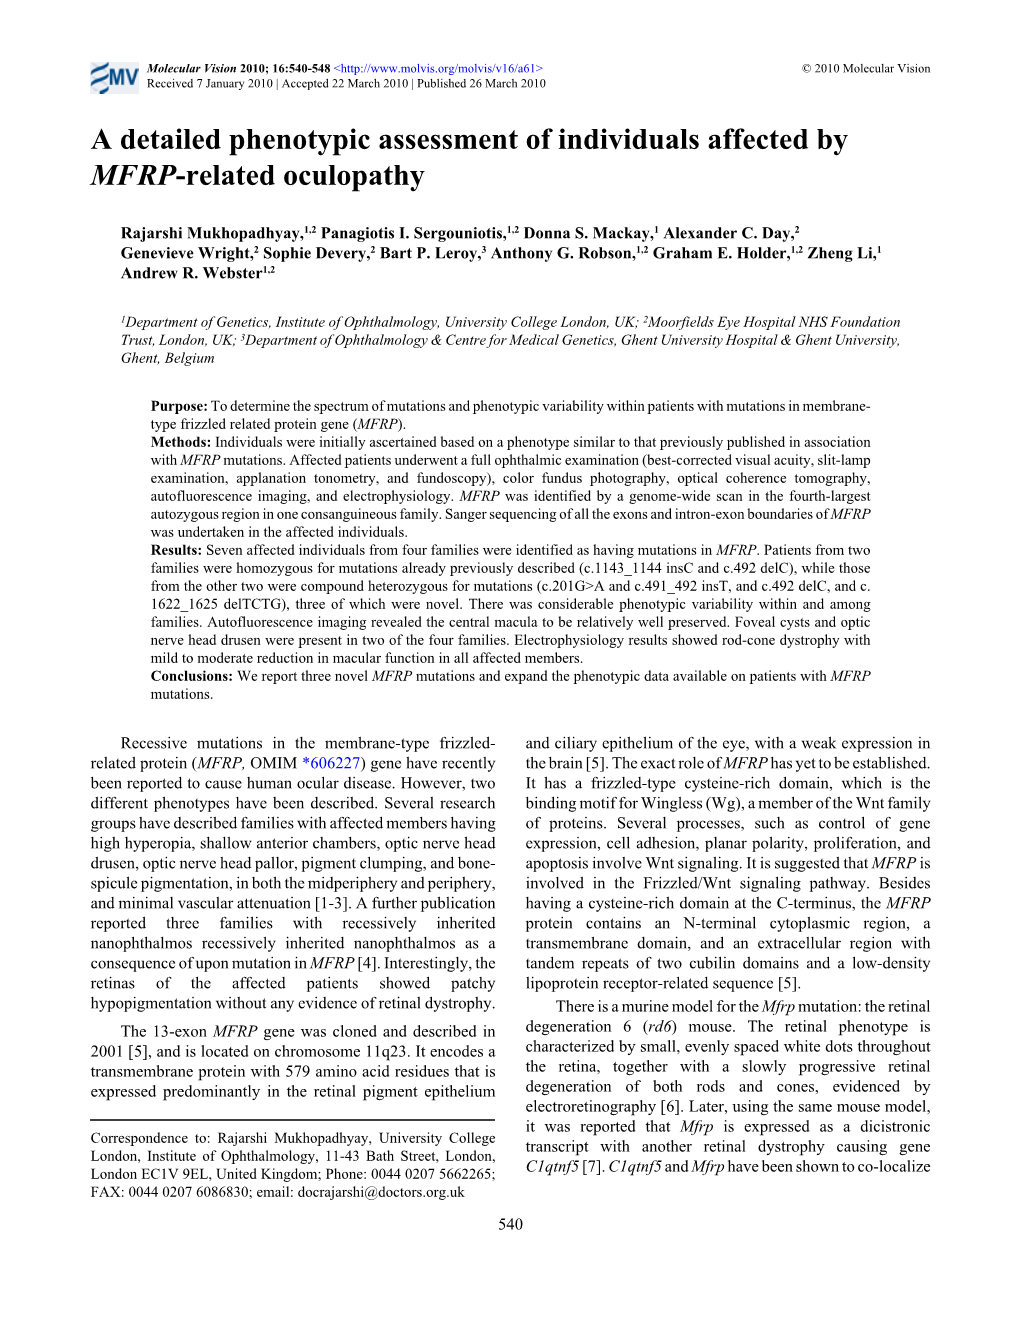 A Detailed Phenotypic Assessment of Individuals Affected by MFRP-Related Oculopathy